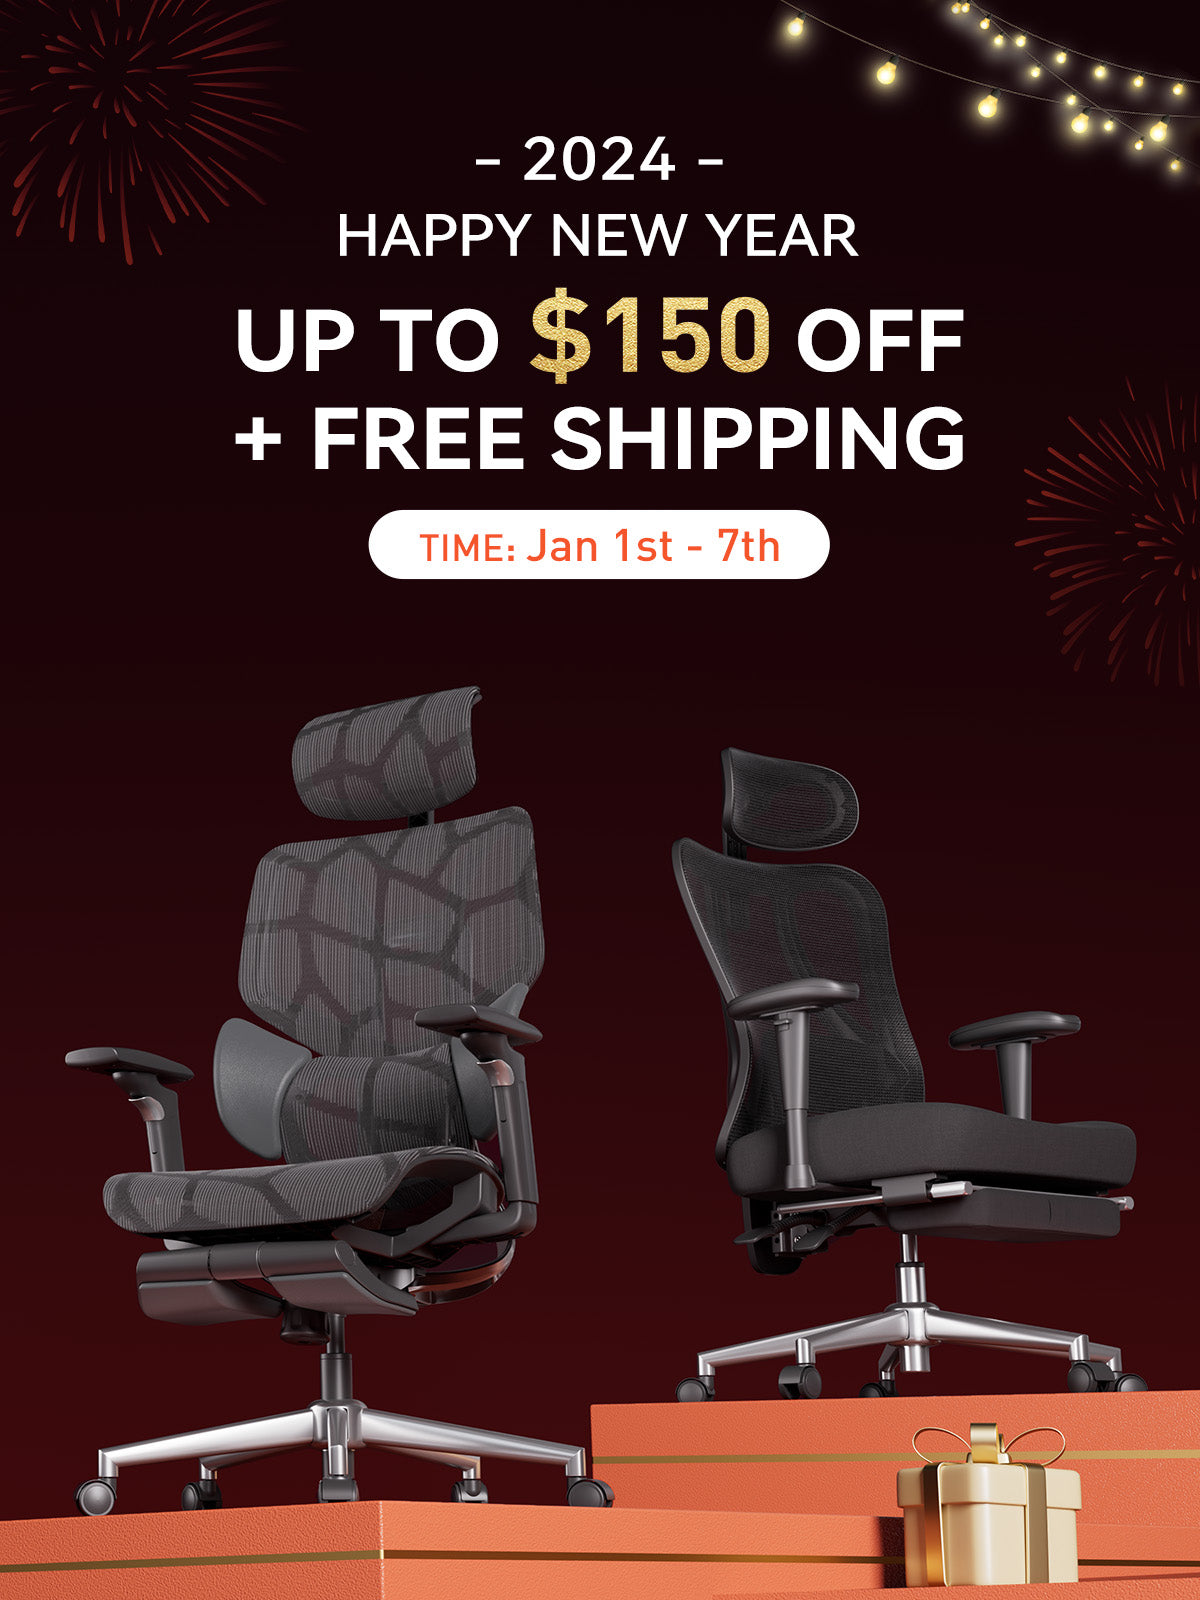 Ergonomic Office Chair Breathable Mesh Task Chair with 3D Headrest and  Flip-up Armrests High Back Thick Cushion Home Desk Chair Computer Chair